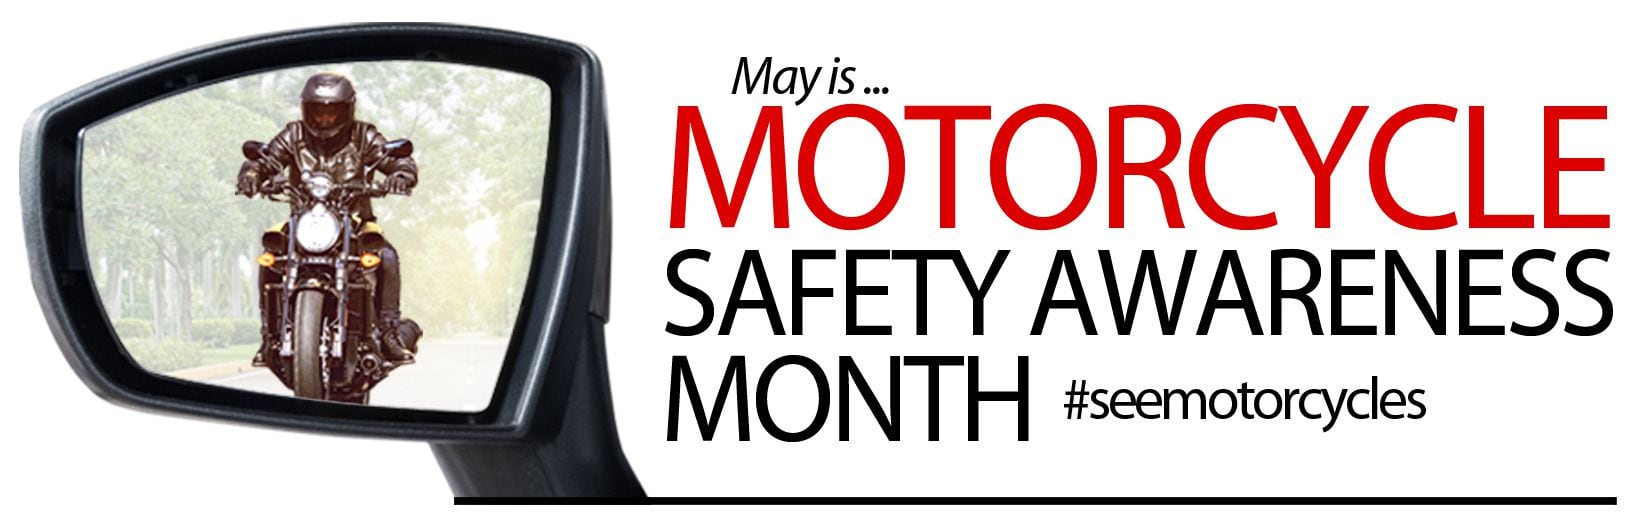 May is Motorcycle Awareness Month, and the MSF is asking drivers to look twice in its new #SeeMotorcycles safety campaign.